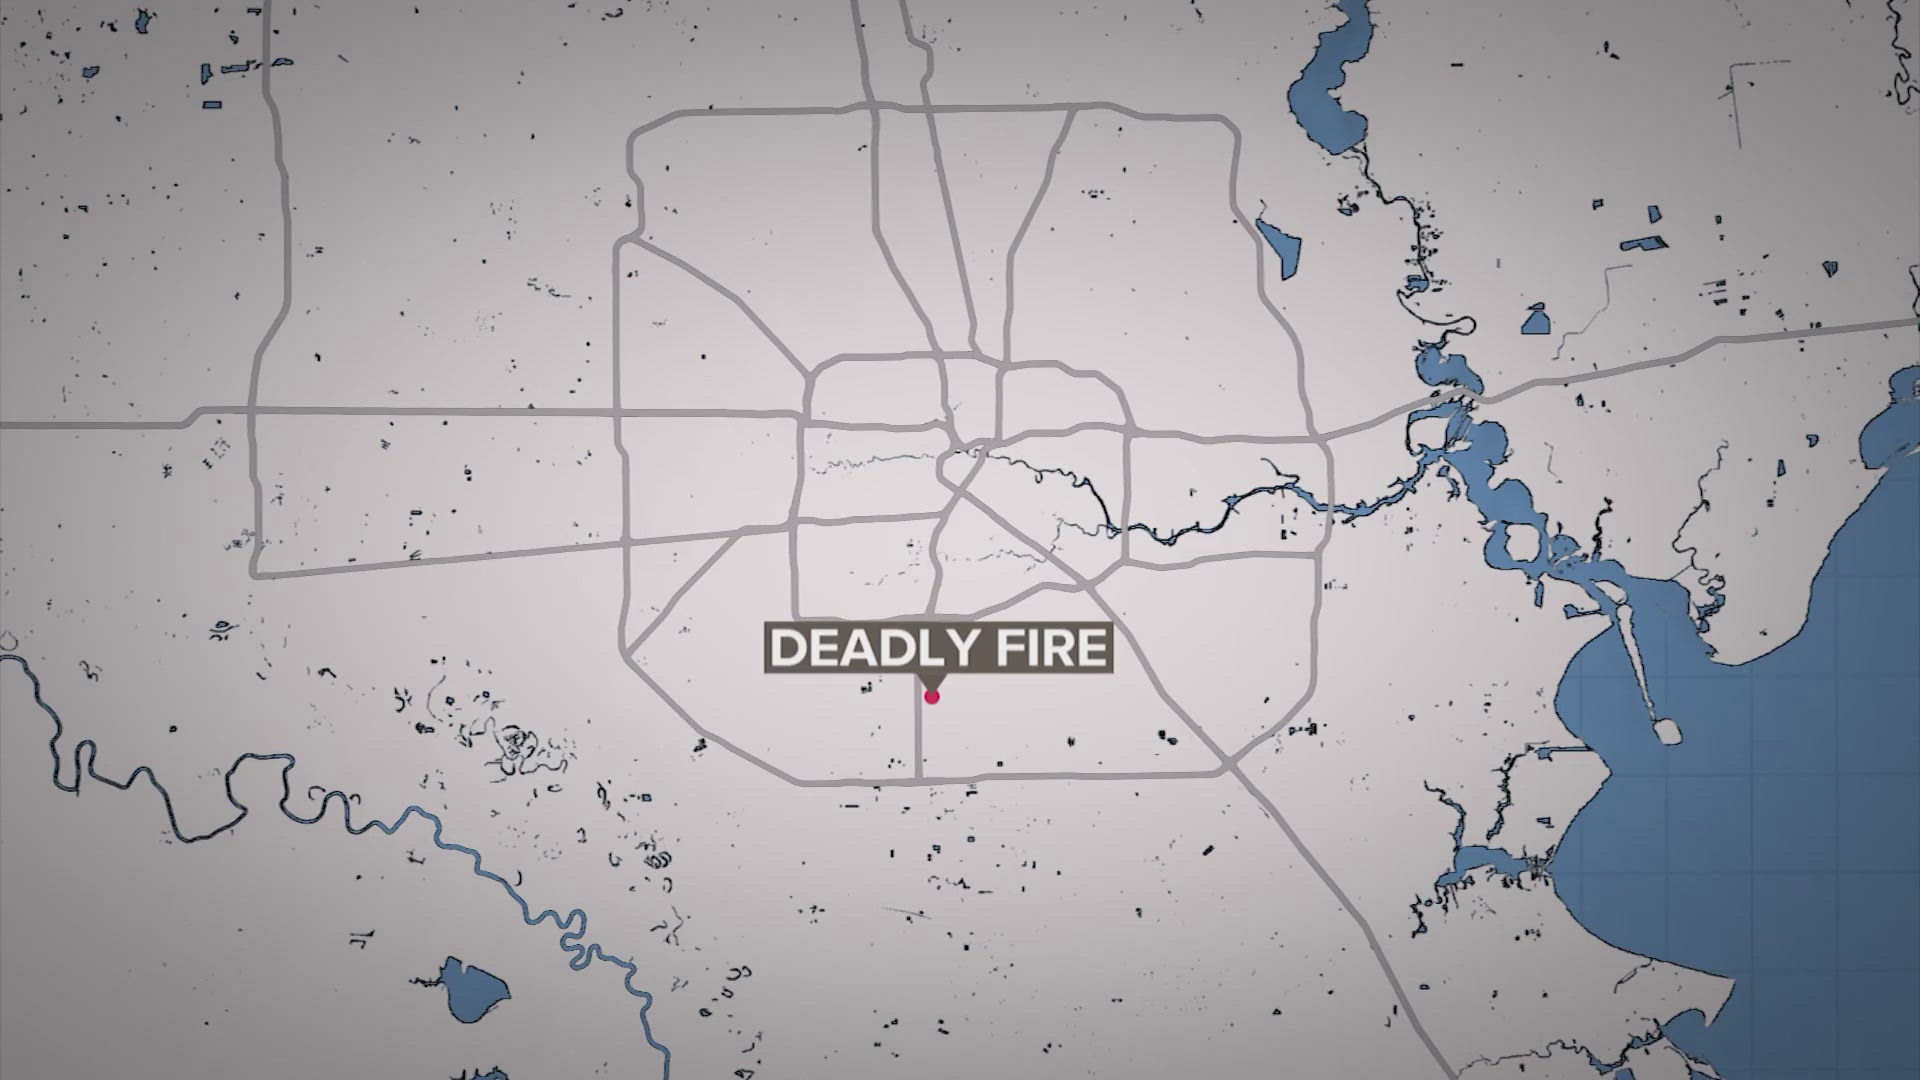 One person died and another was injured in a house fire in south Houston on Saturday.